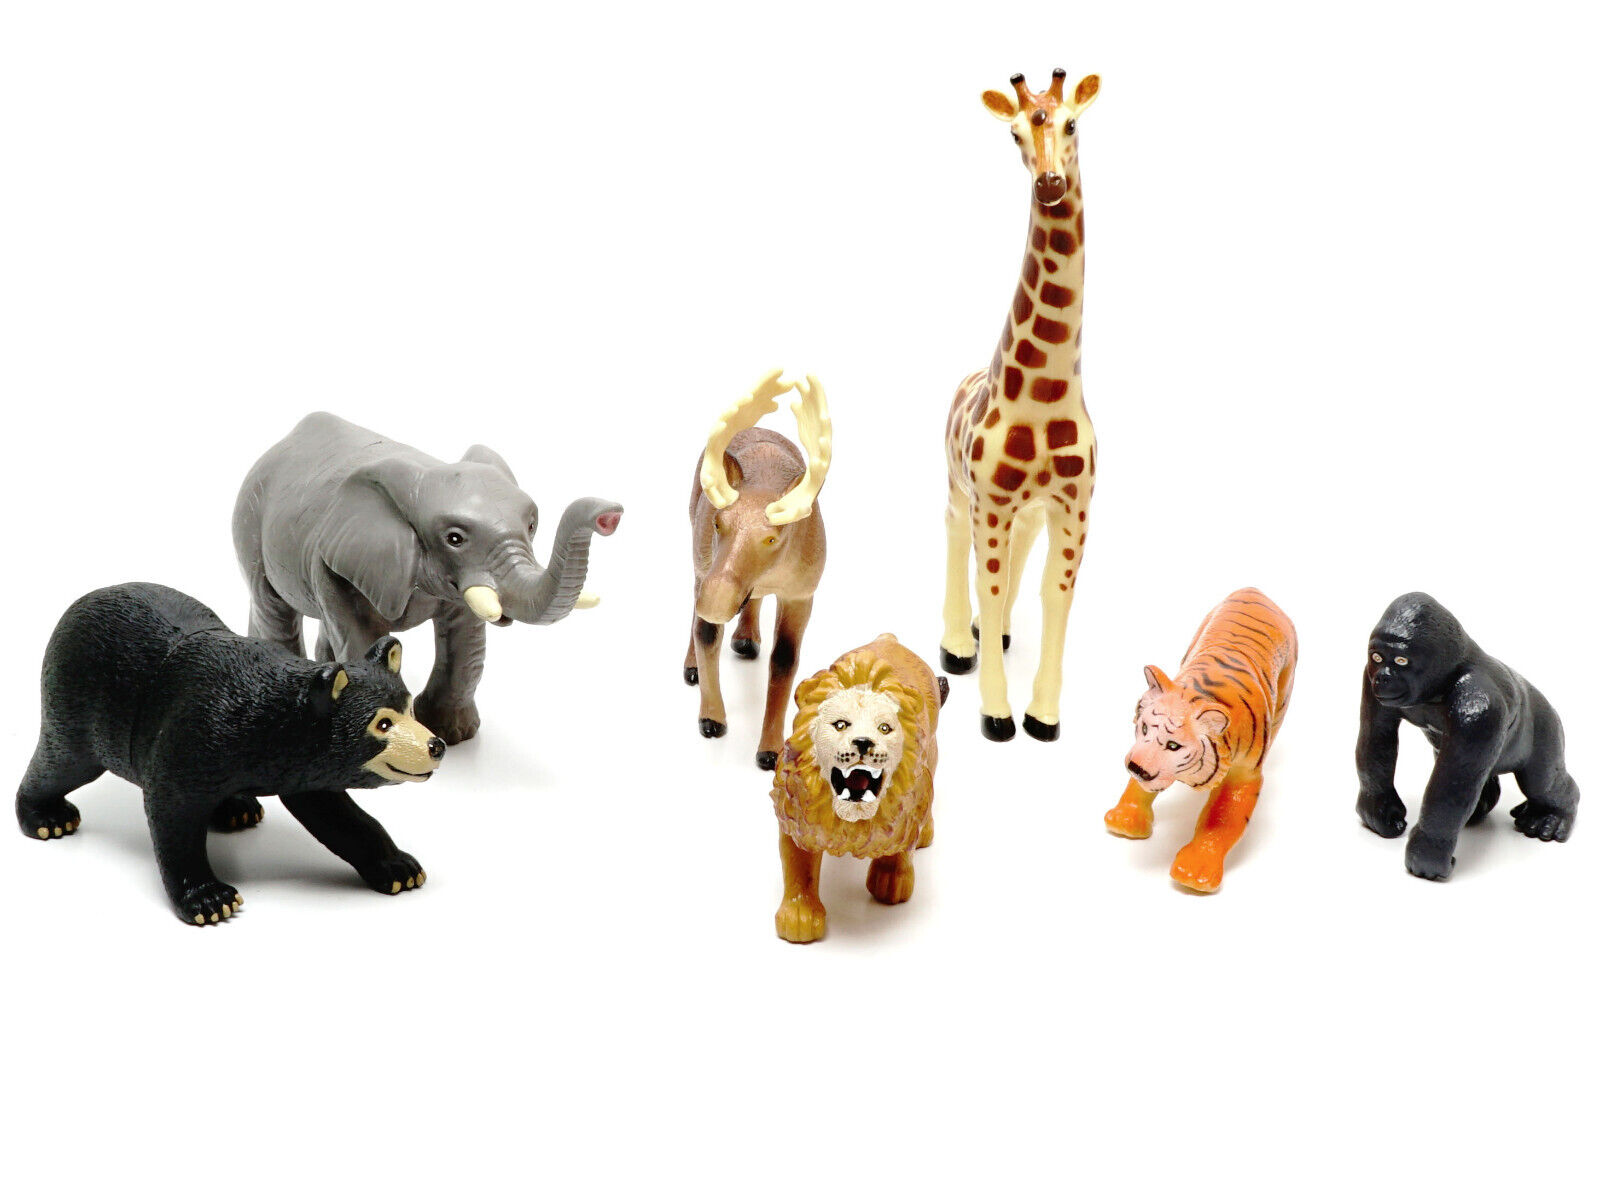 Jumbo Animals: Learning Resources 5 Jungle Animals and 2 Forest Animals |  eBay